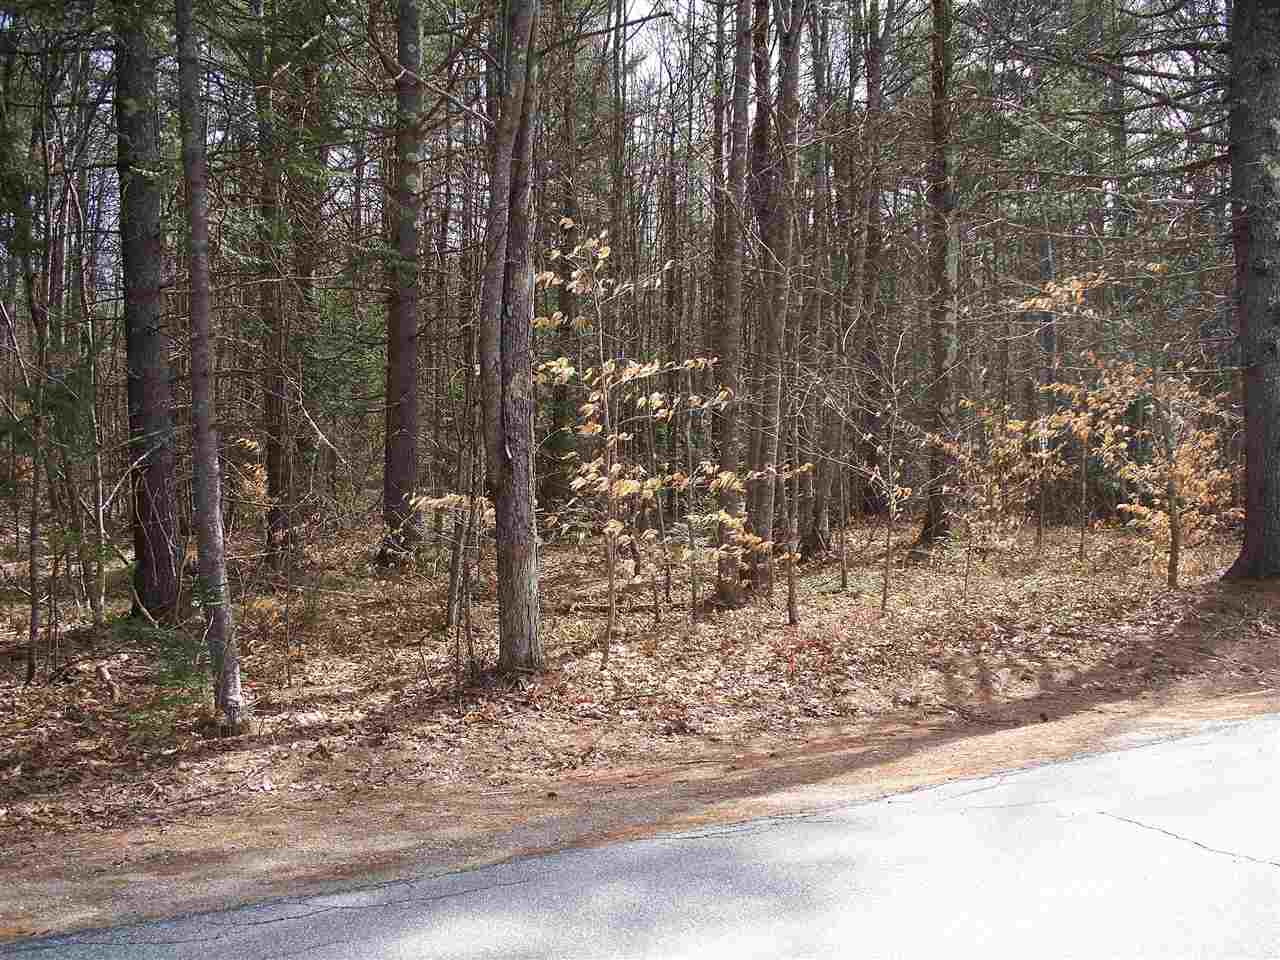  Lot #14, Old Goshen Road Conway, NH Photo